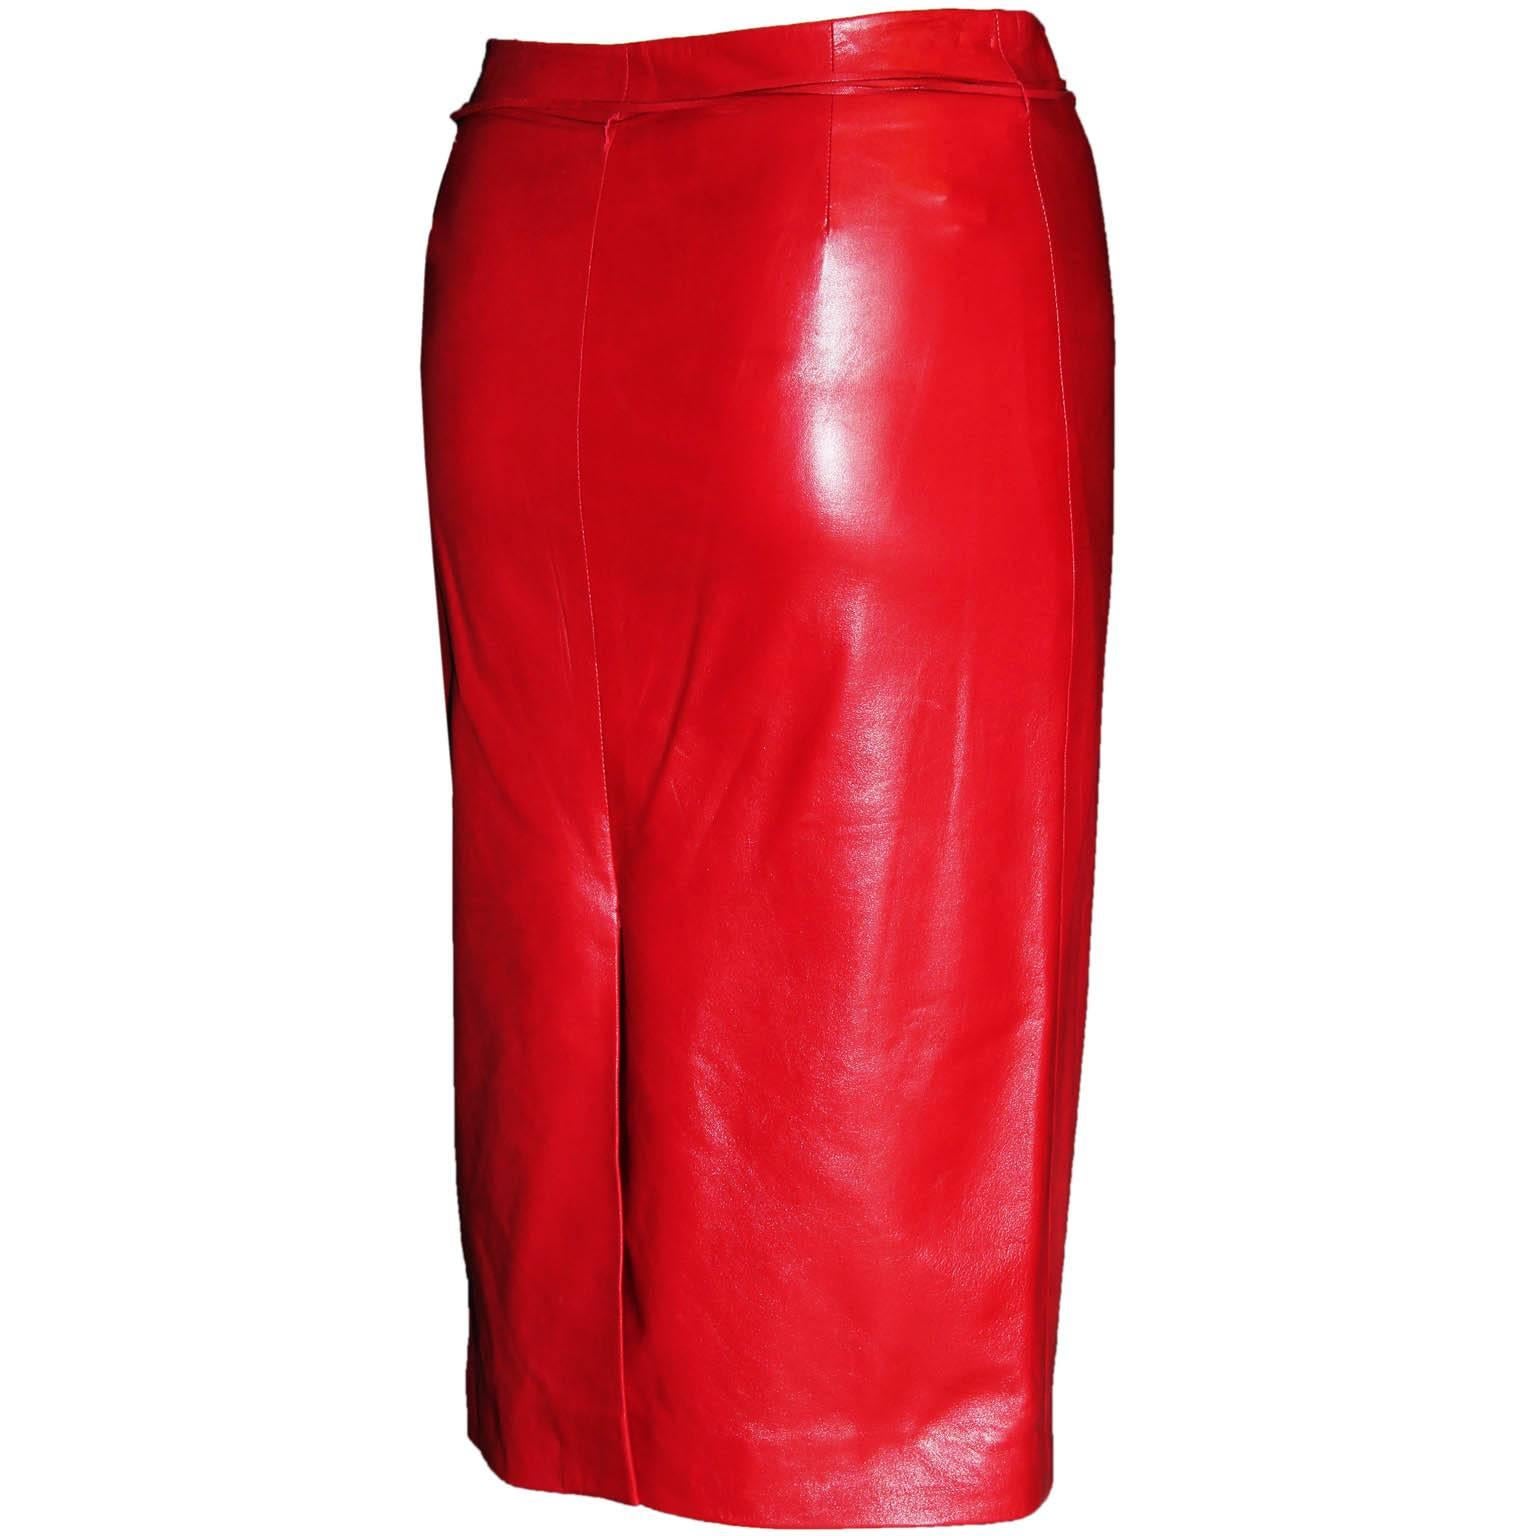 Gorgeous Tom Ford For Gucci Fall/Winter 1997 Red Lambskin Leather Skirt And Belt!

This gorgeous skirt is an italian size 38 and fits a US size 0 to 2. This skirt is in lovely condition with barely any sign of wear and is an absolute must for any